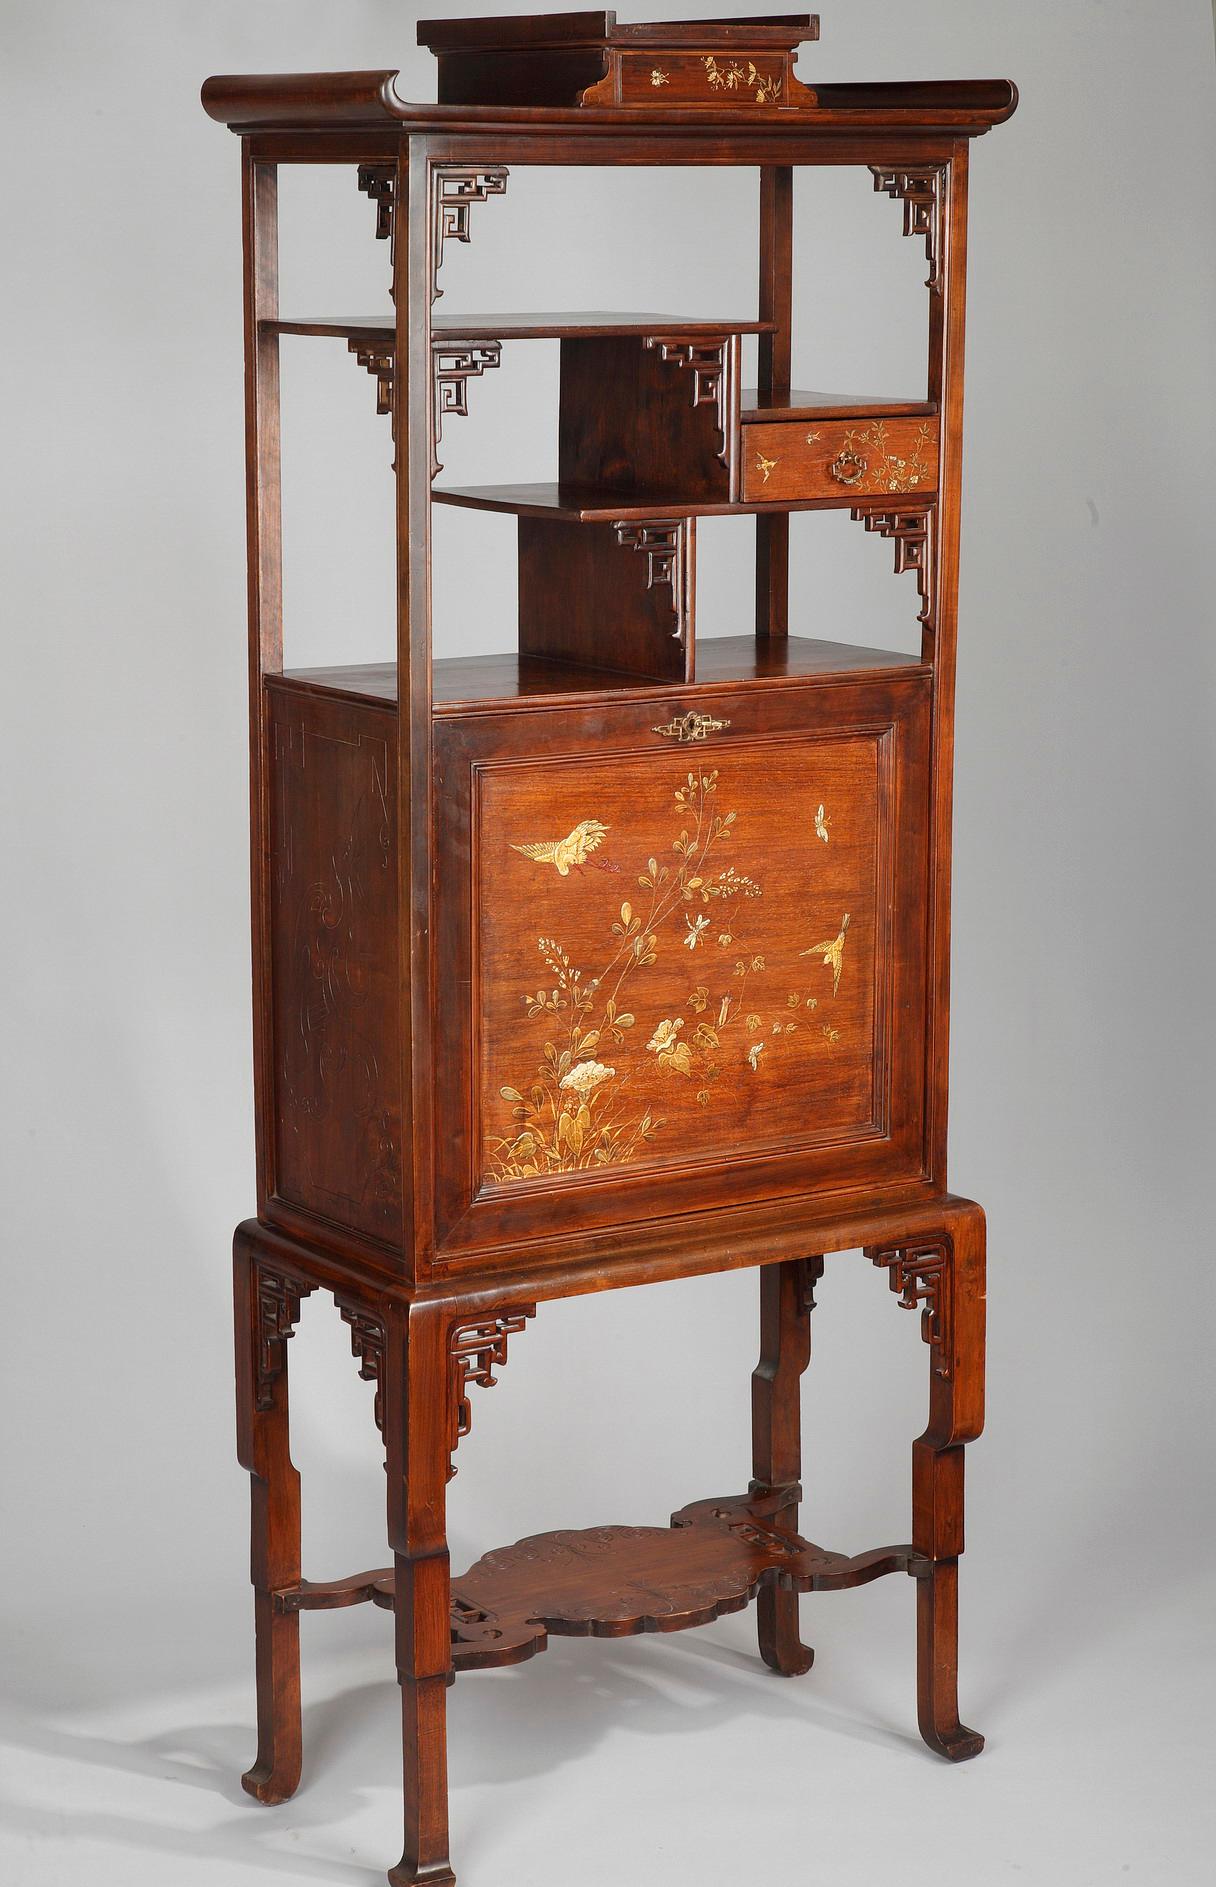 A Japanese style carved wood cabinet attributed to G. Viardot. A painted decor imitating Japanese lacquer, ornamented with flowers, birds and butterflies. Opening onto two drawers and a paper filer, the upright-secretary door is also fitted with red